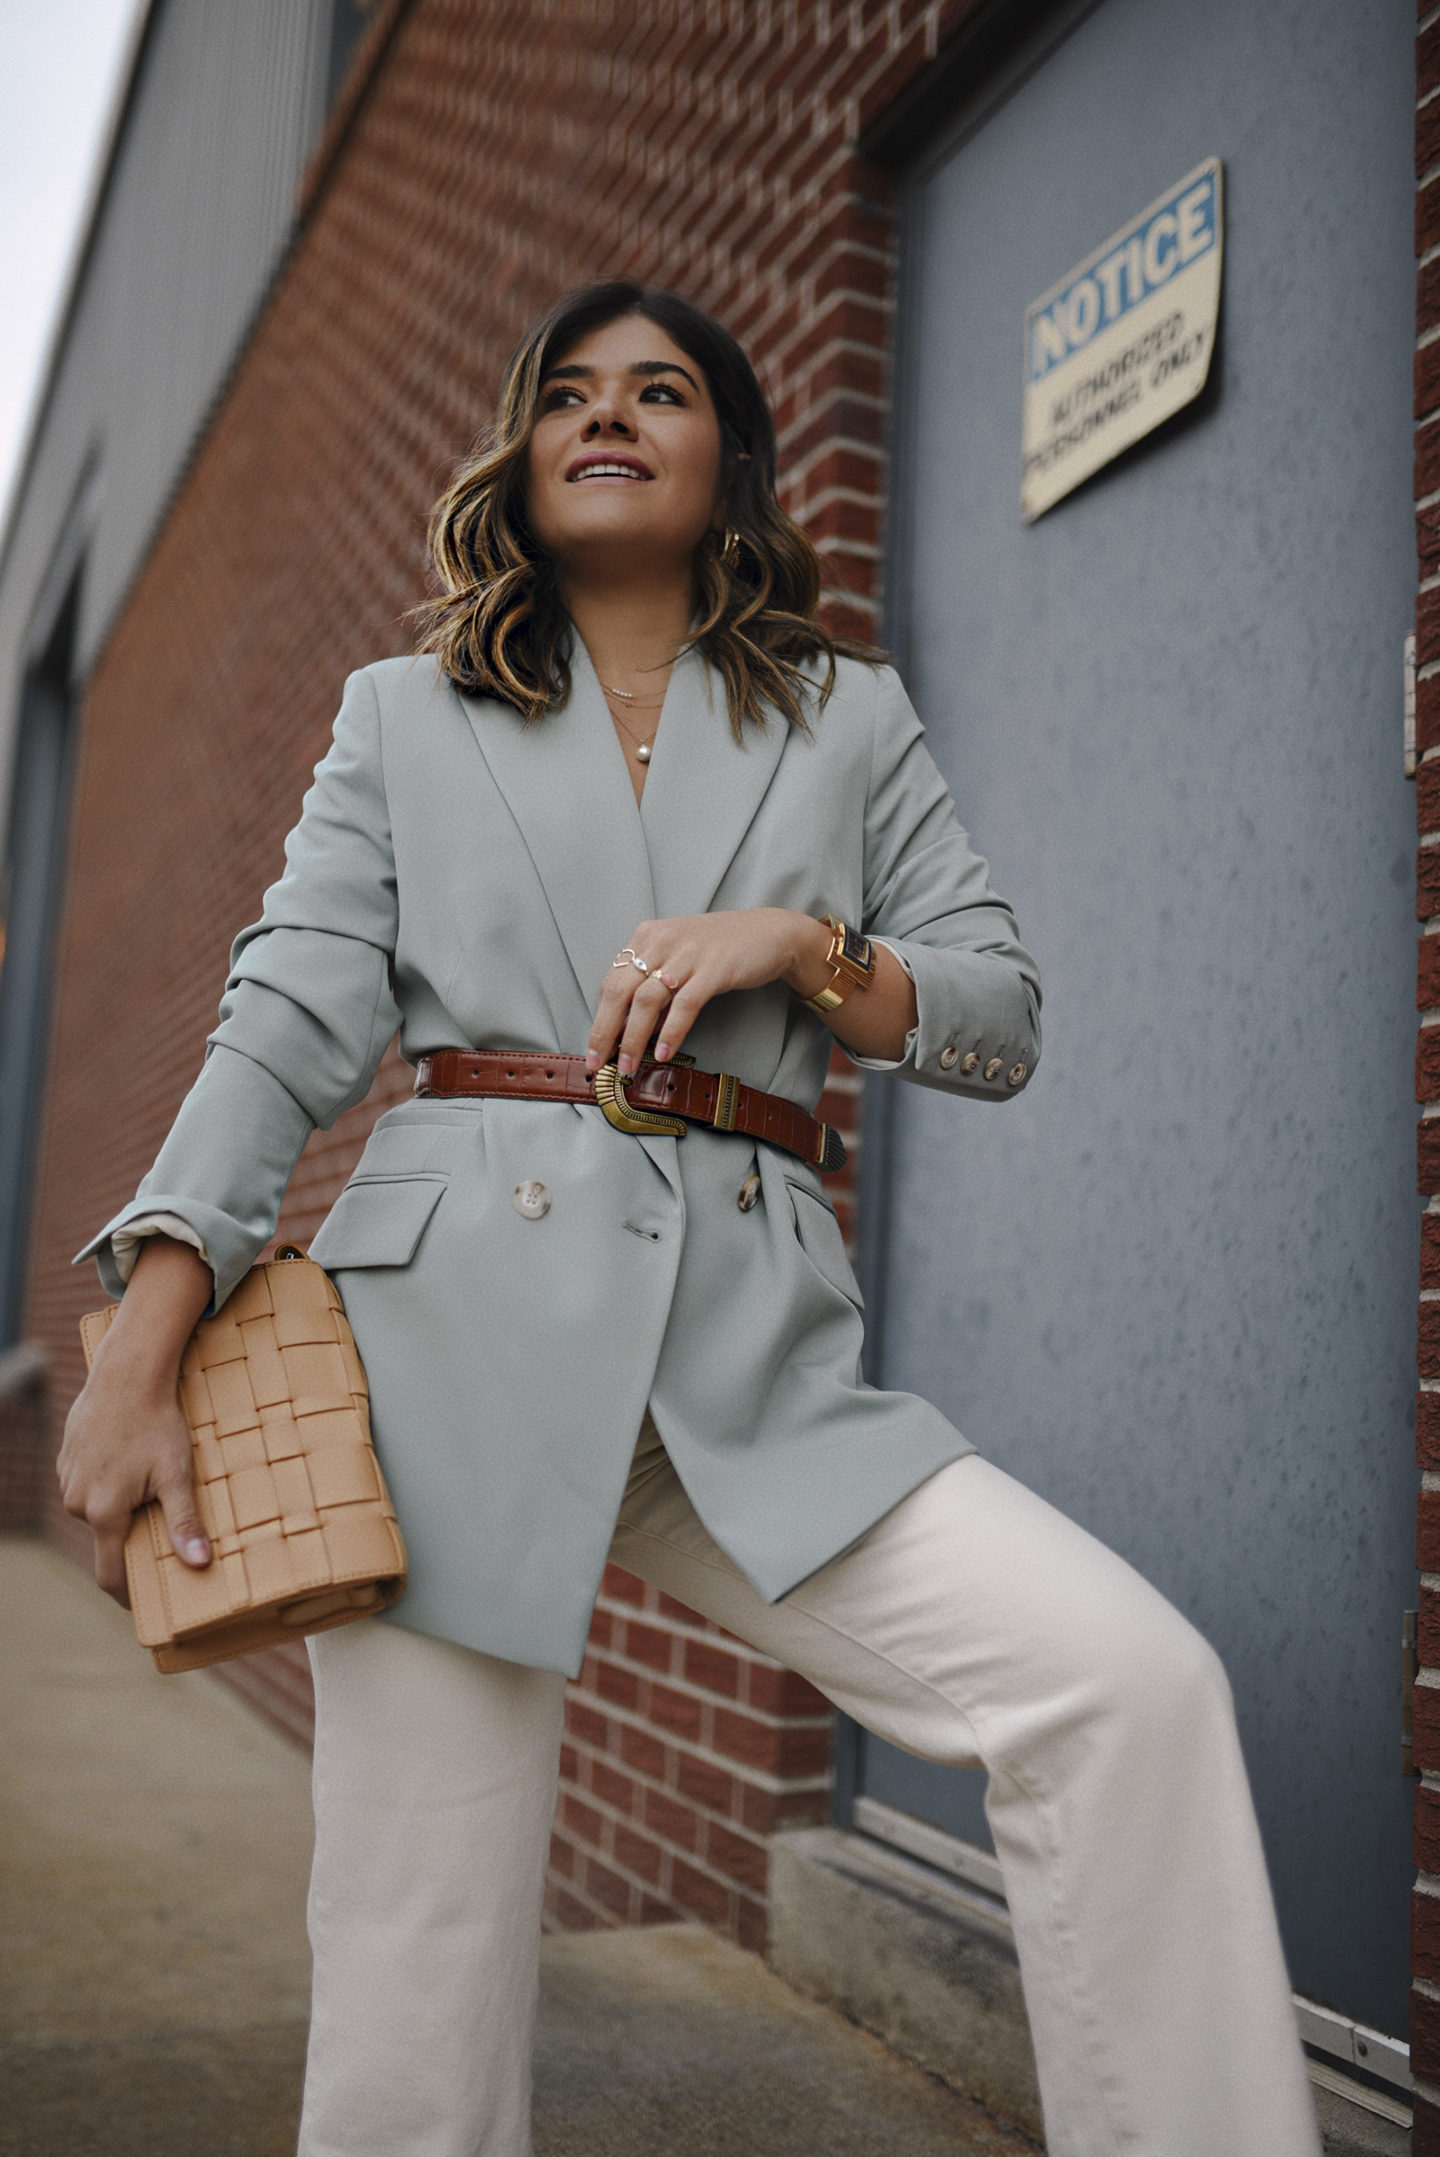 A CHIC WAY TO STYLE WESTERN BELTS, CHIC TALK